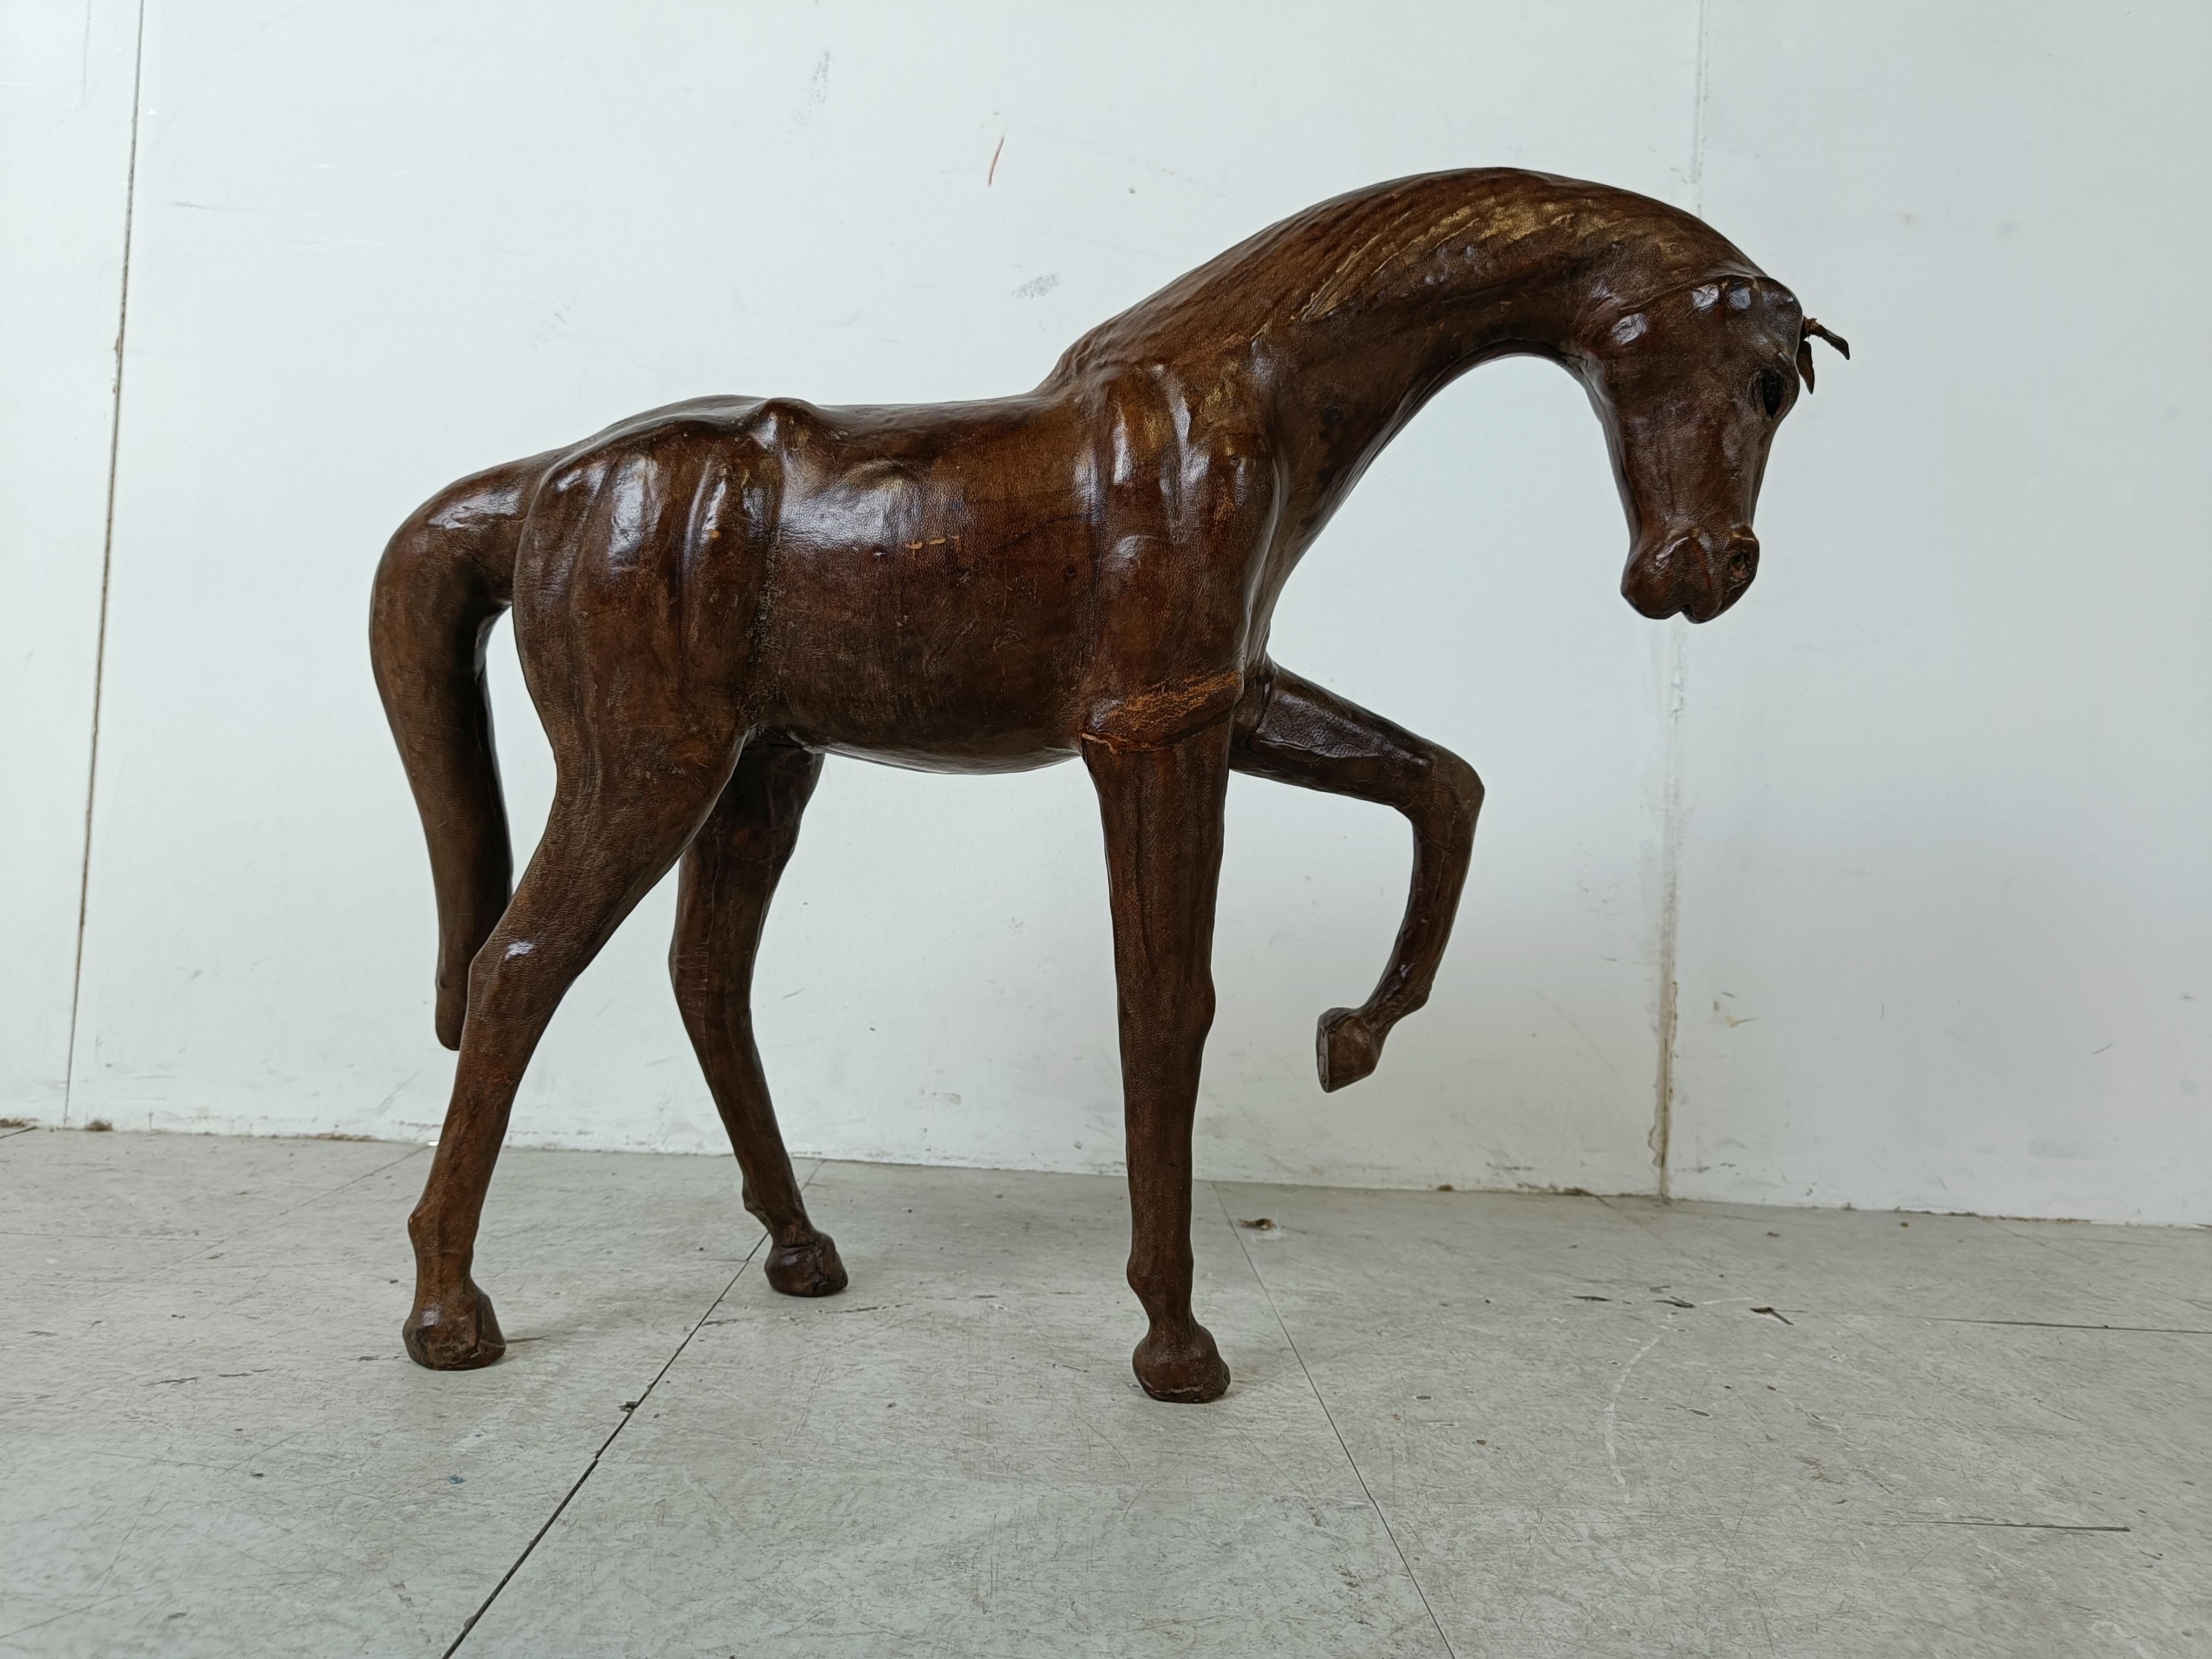 Beautiful mid century leather horse figure.

Very well made and elegant posing horse figure.

1960s - Country unknown

Good condition

Dimensions:
Height: 60cm/23.62